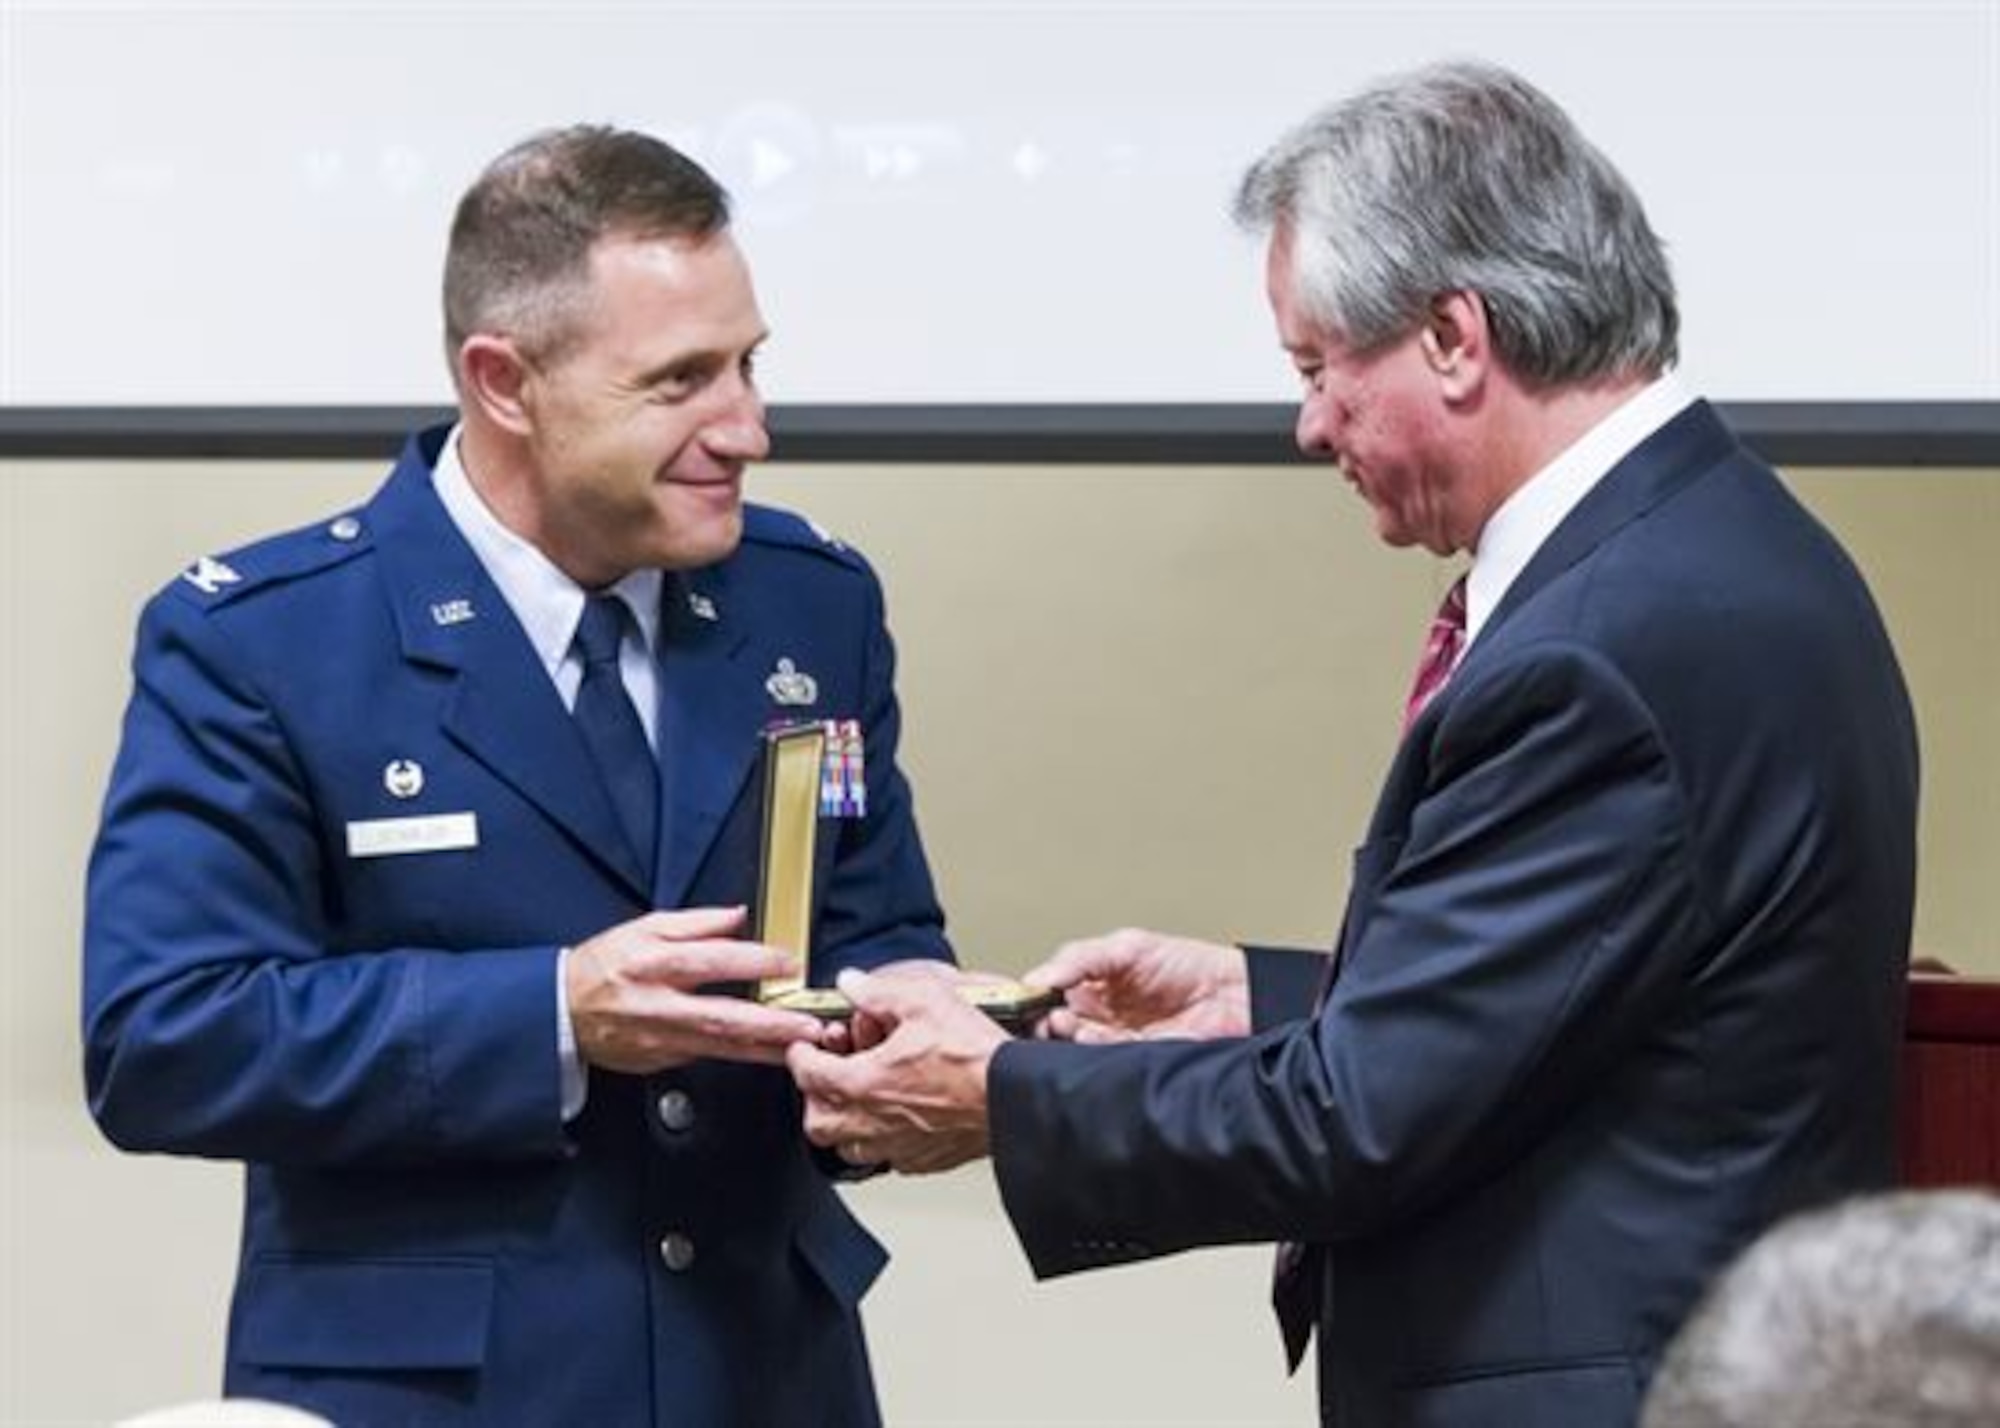 Col. Kirk B. Stabler, the Air Force Office of Special Investigations commander, presents fallen Special Agent Lee Hitchcock’s Bronze Star Medal  to his brother, Craig Hitchcock, during the OSI headquarters inaugural Celebration of Life Remembrance Ceremony May 22, 2017, at Quantico, Va. (U.S. Air Force photo/Michael Hastings)